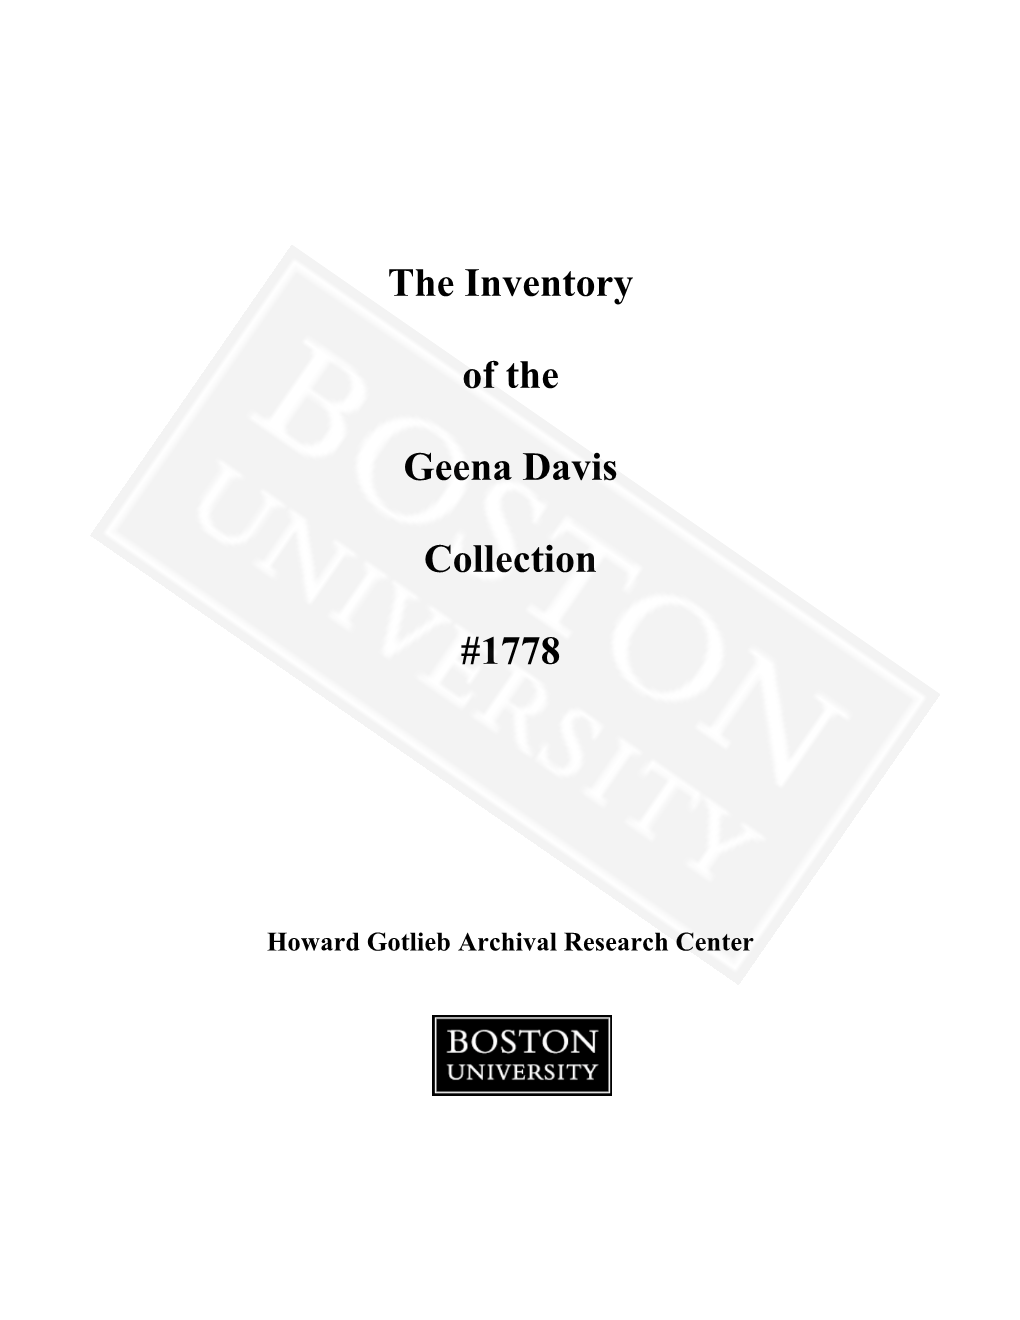 The Inventory of the Geena Davis Collection #1778